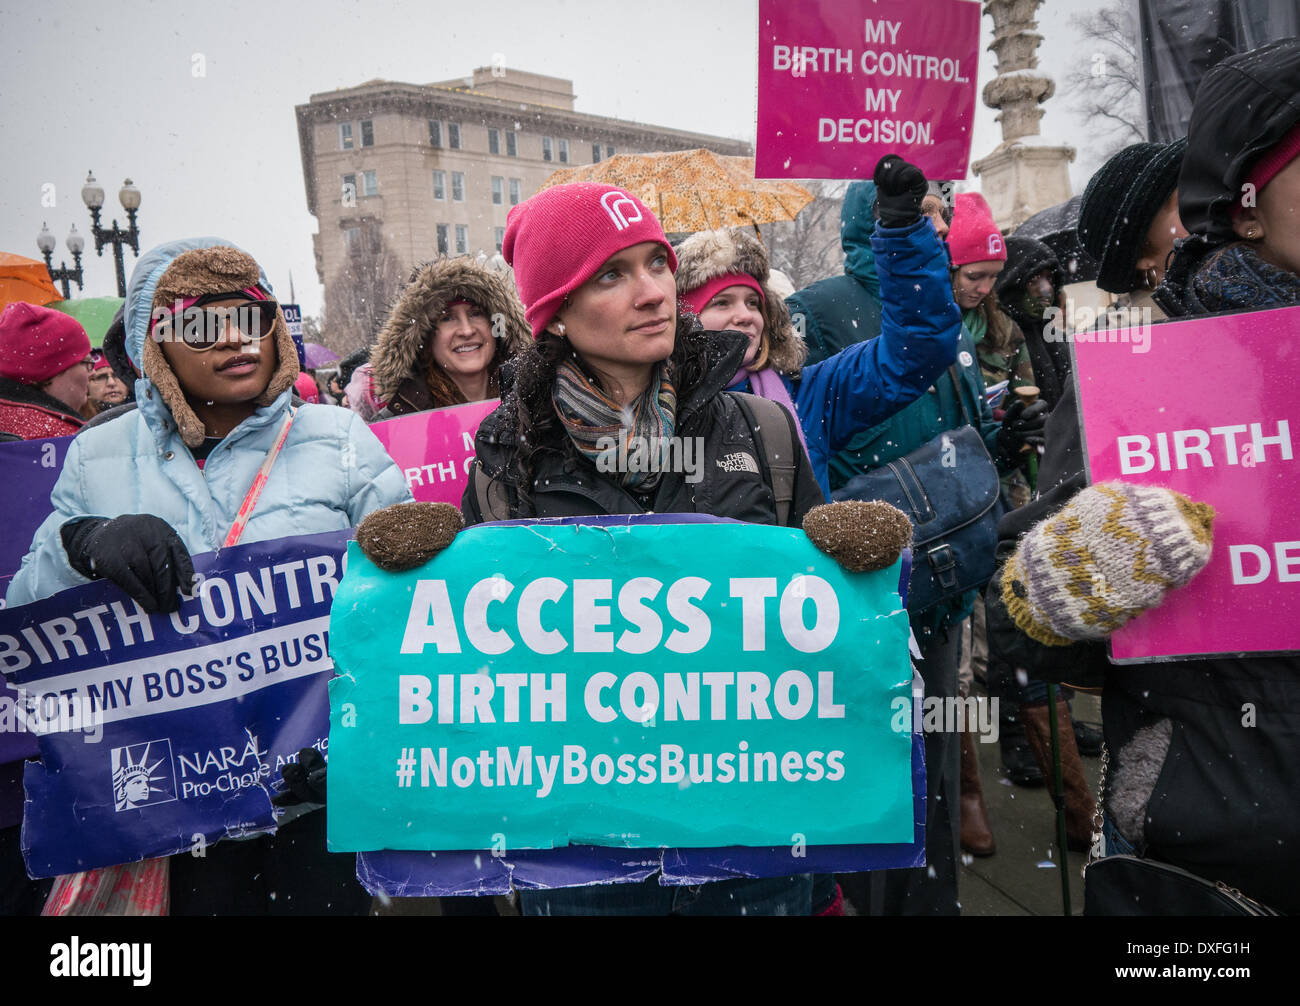 Washington, DC USA 25 March, 3014: Hundreds of women protested at the U.S. Supreme Court to voice opposition to the Hobby Lobby case, which seeks to give health exemptions for religious beliefs. The court heard arguments today in this contentious battle. Credit:  Ann Little/Alamy Live News Stock Photo